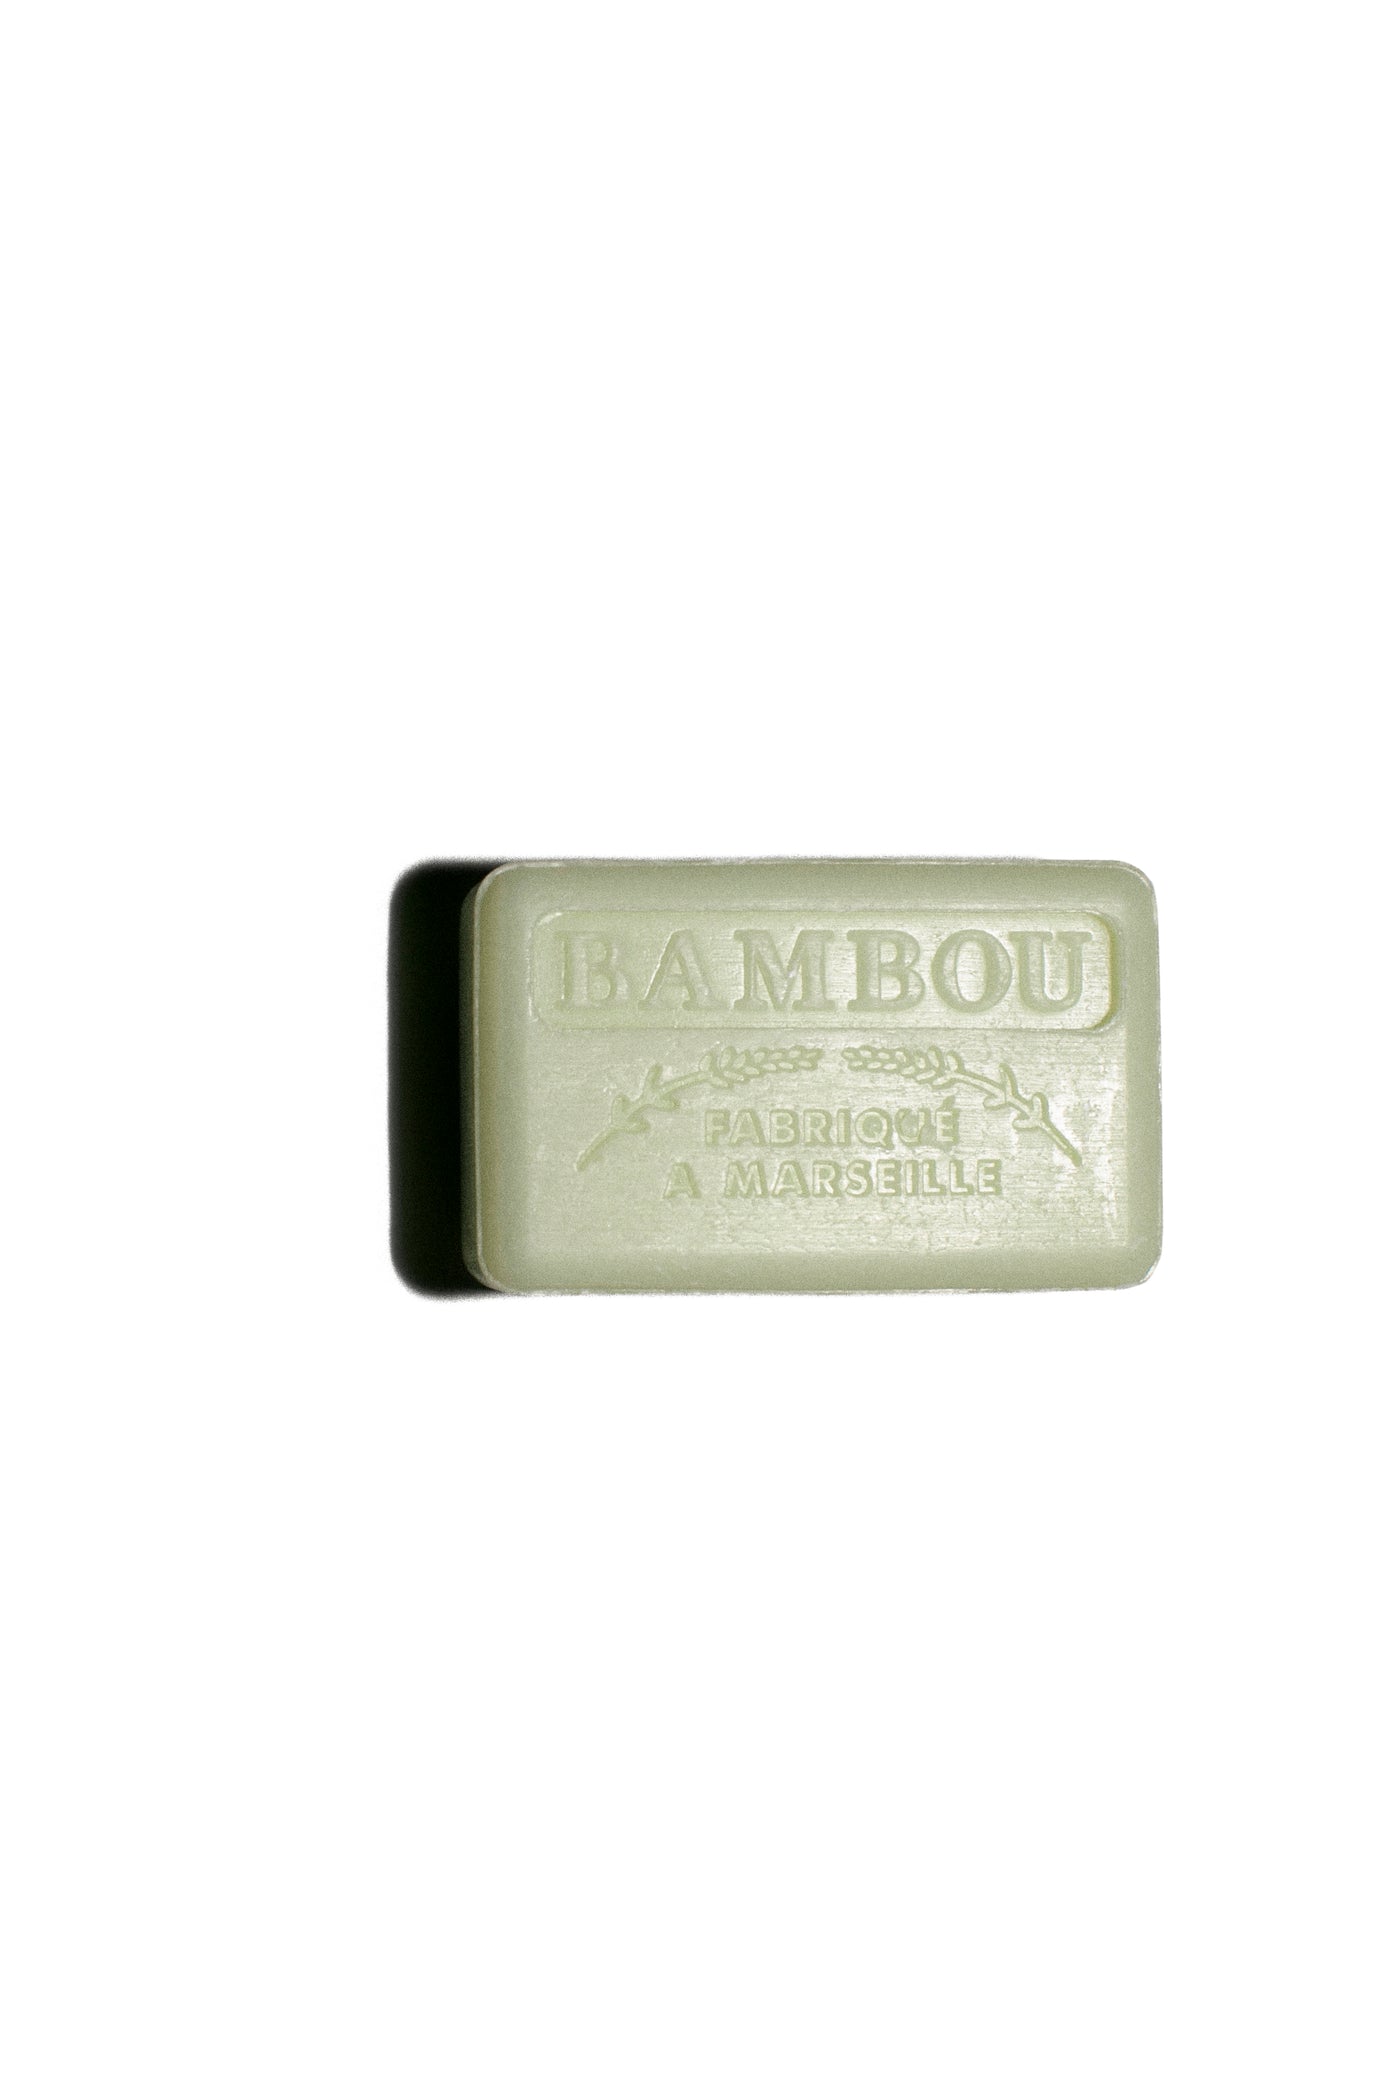 Marseille Bamboo Organic Soap with Shea Butter